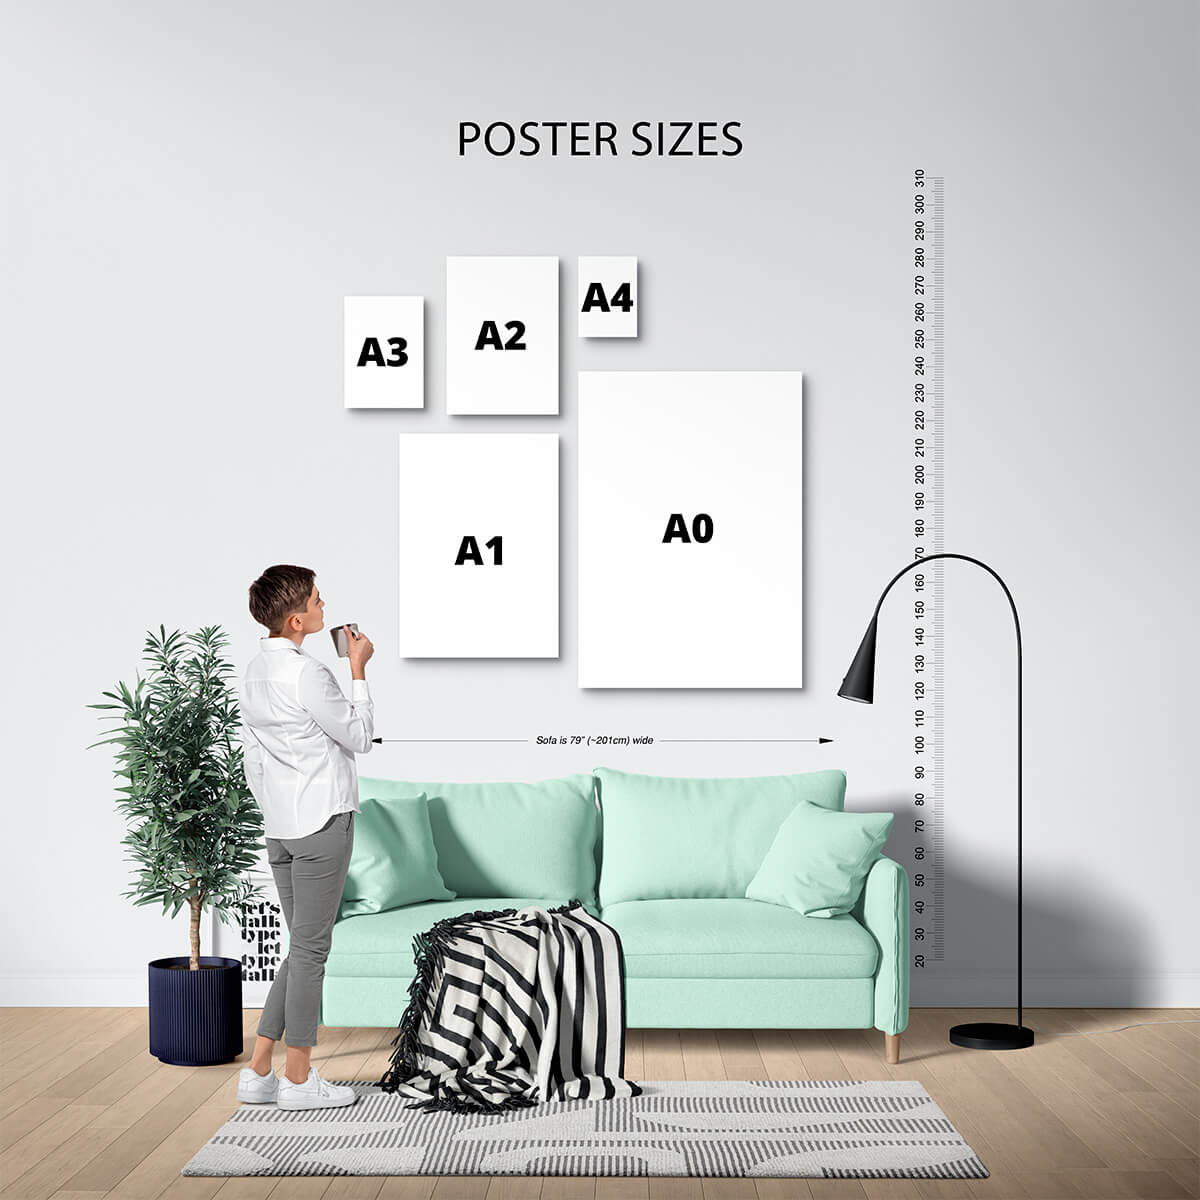 Hey size comparison guide for five different types of poster sizes